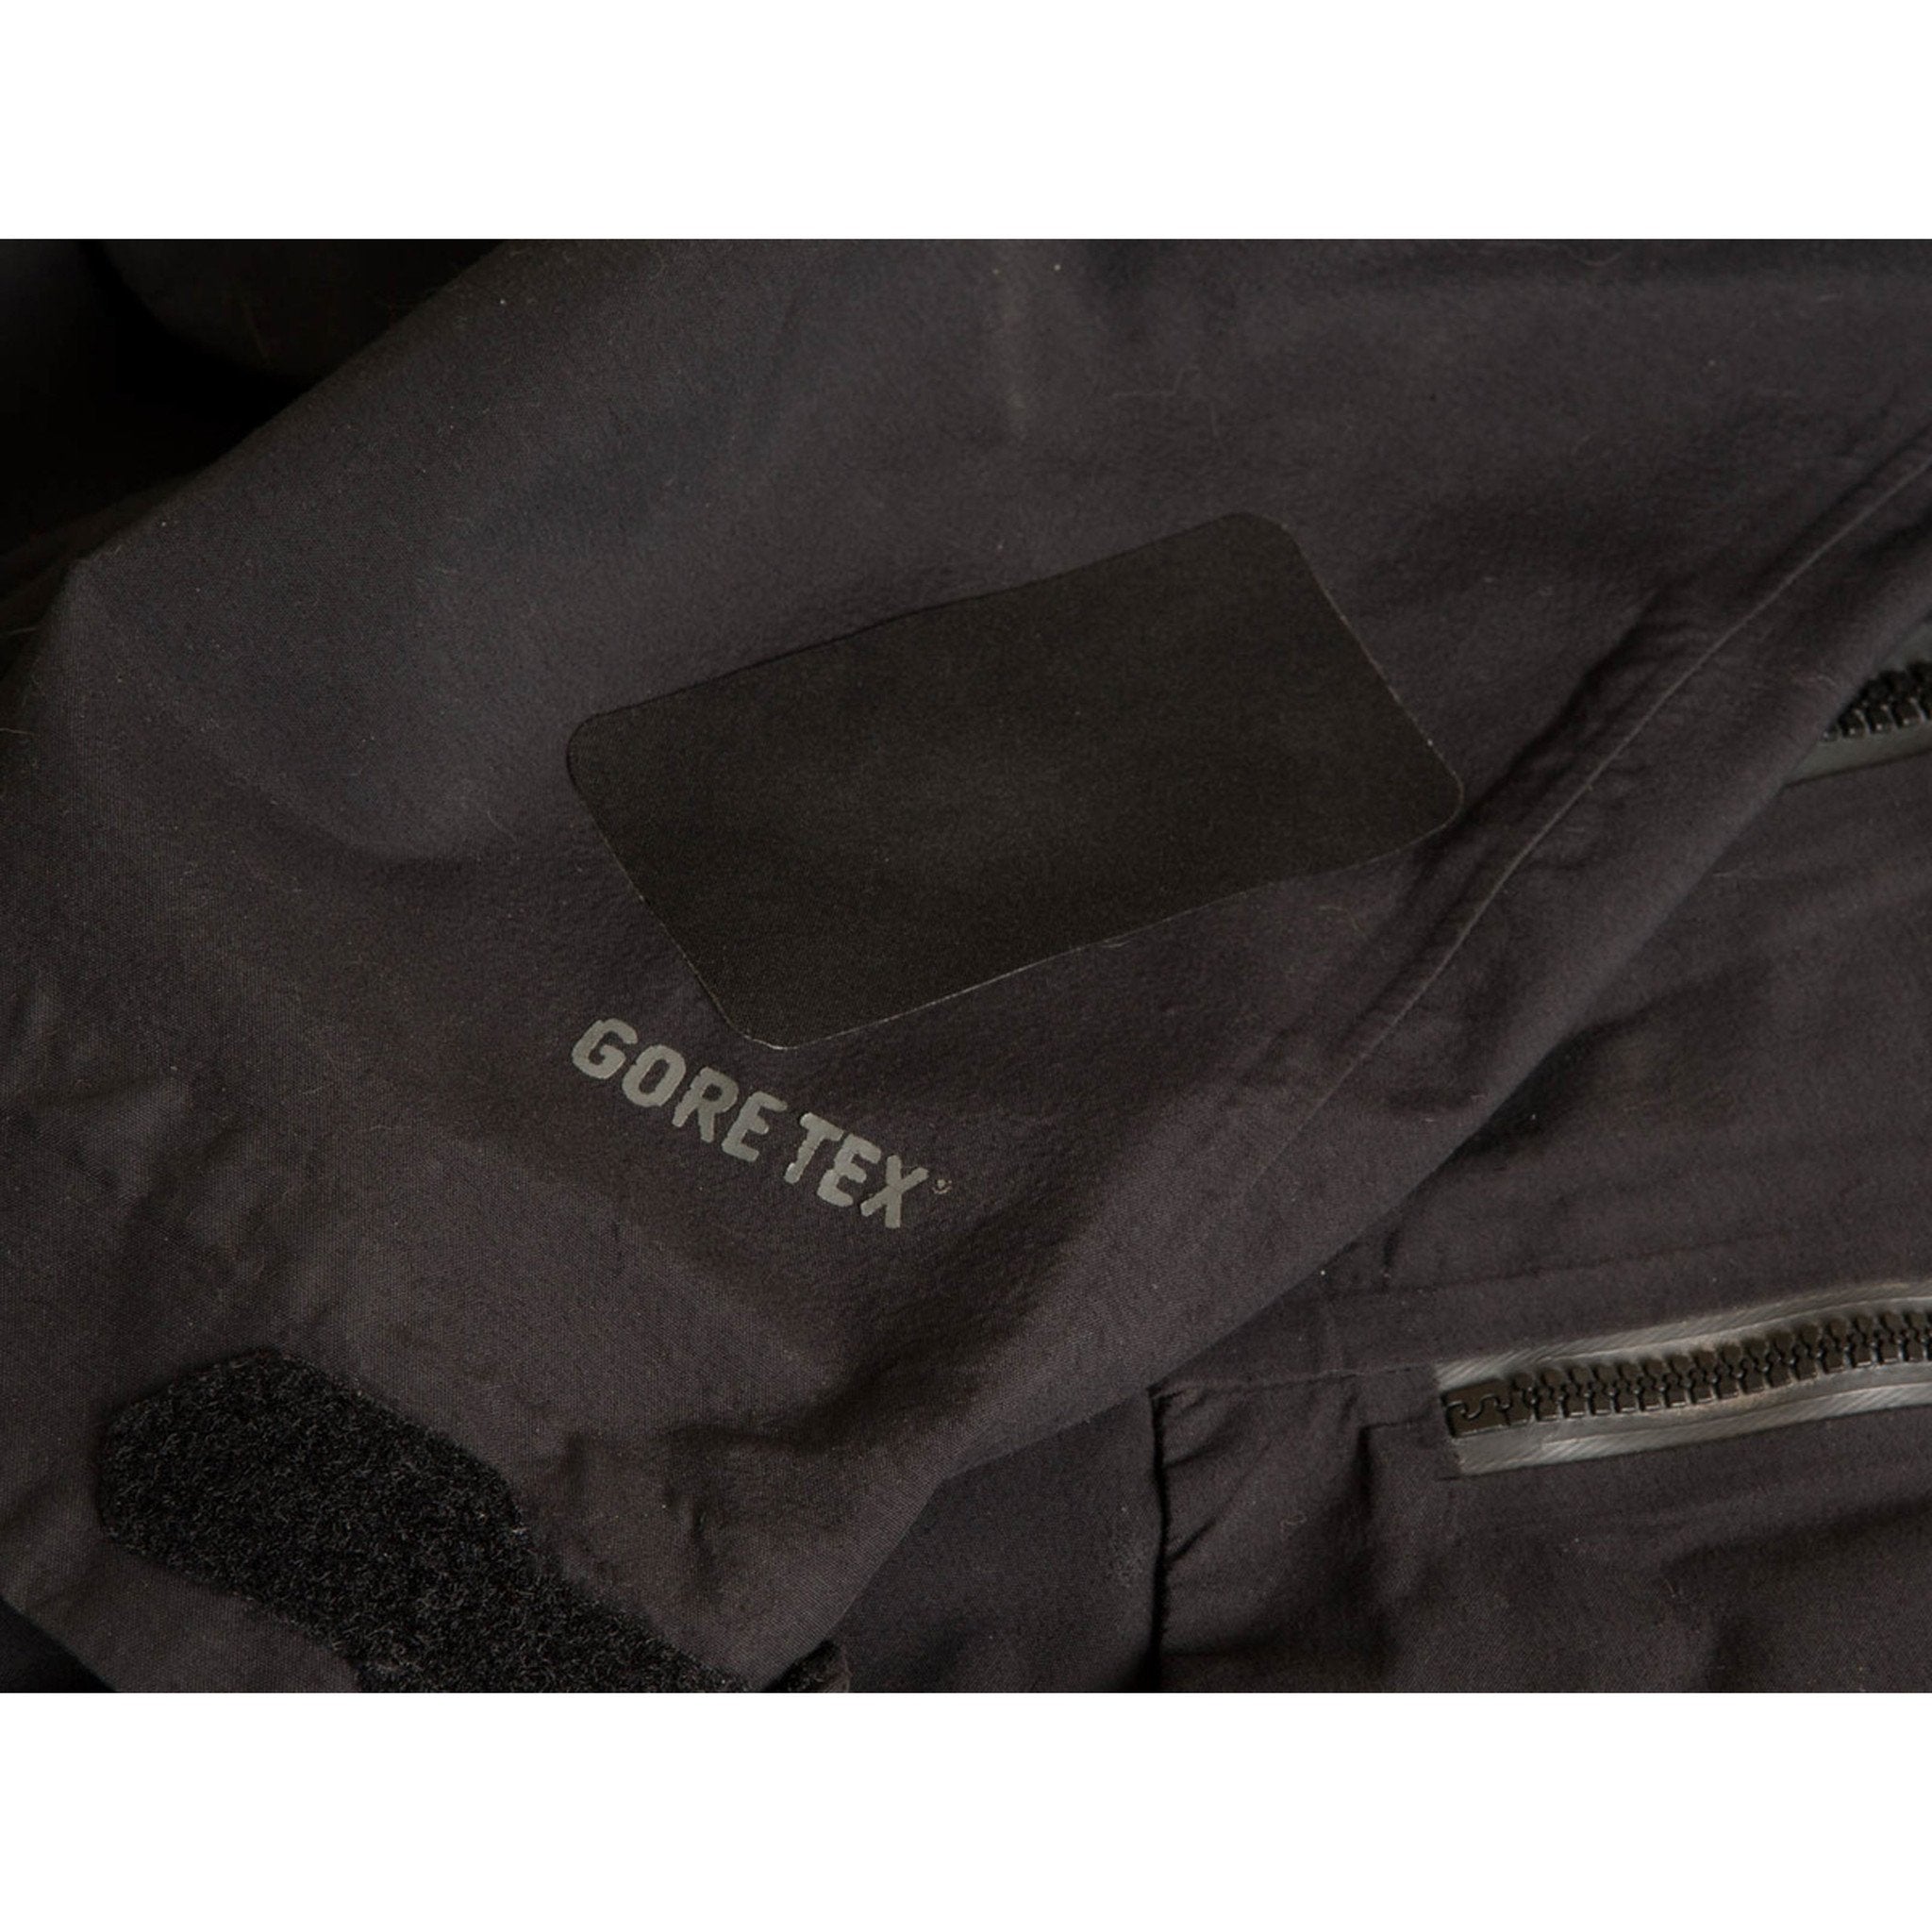 easy to iron gore tex repair tape for your expensive goretex jackets,  pants, sports clothing seam sealing